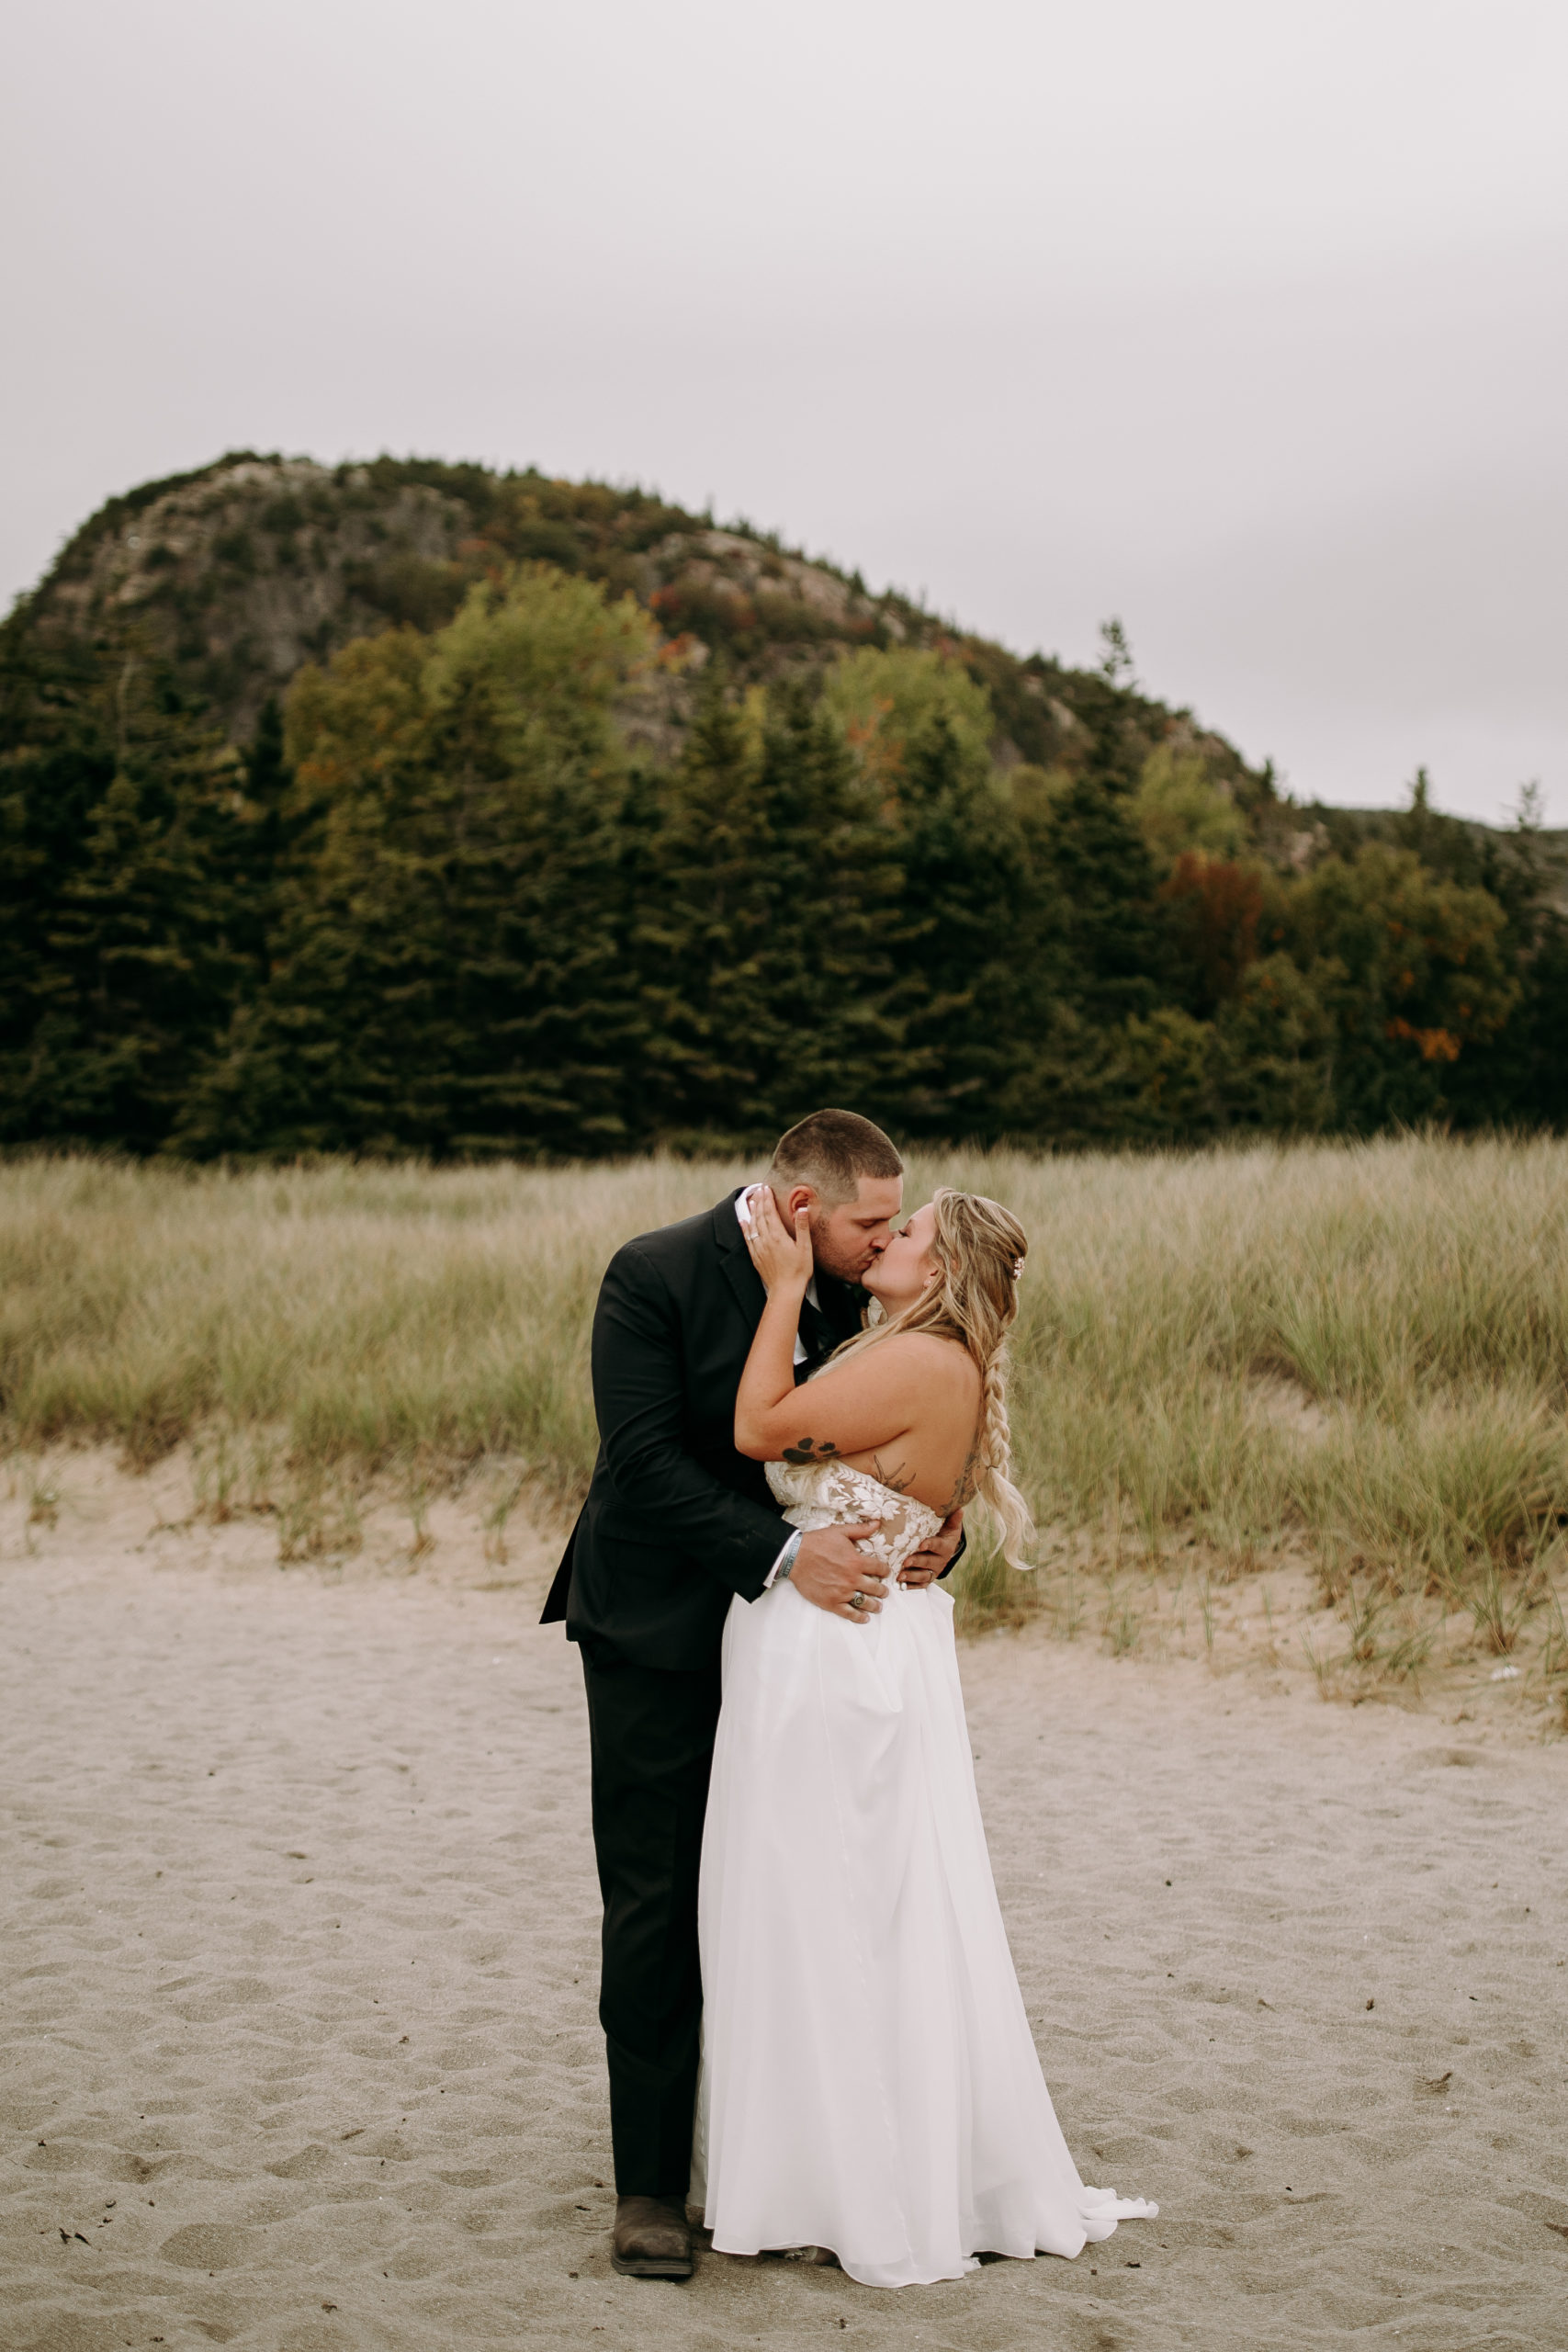 How to Elope at Acadia National Park in 10 Easy Steps